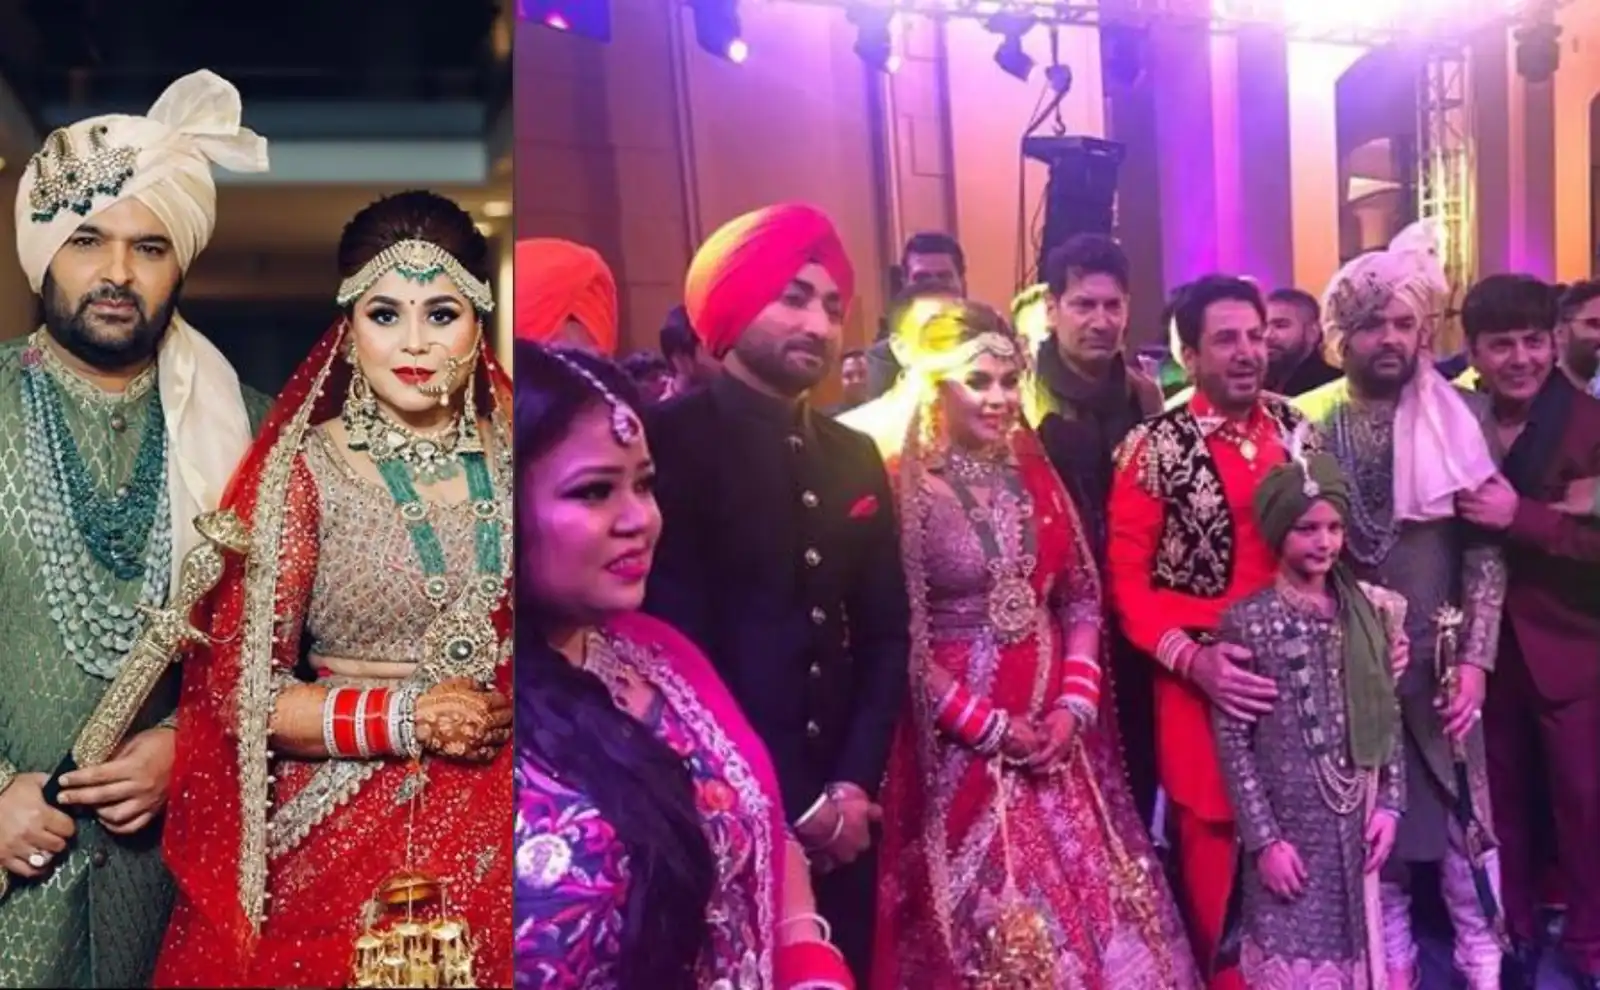 In Pictures: Kapil Sharma And Ginni Chatrath's Wedding Is A Big Fat Punjabi Affair!